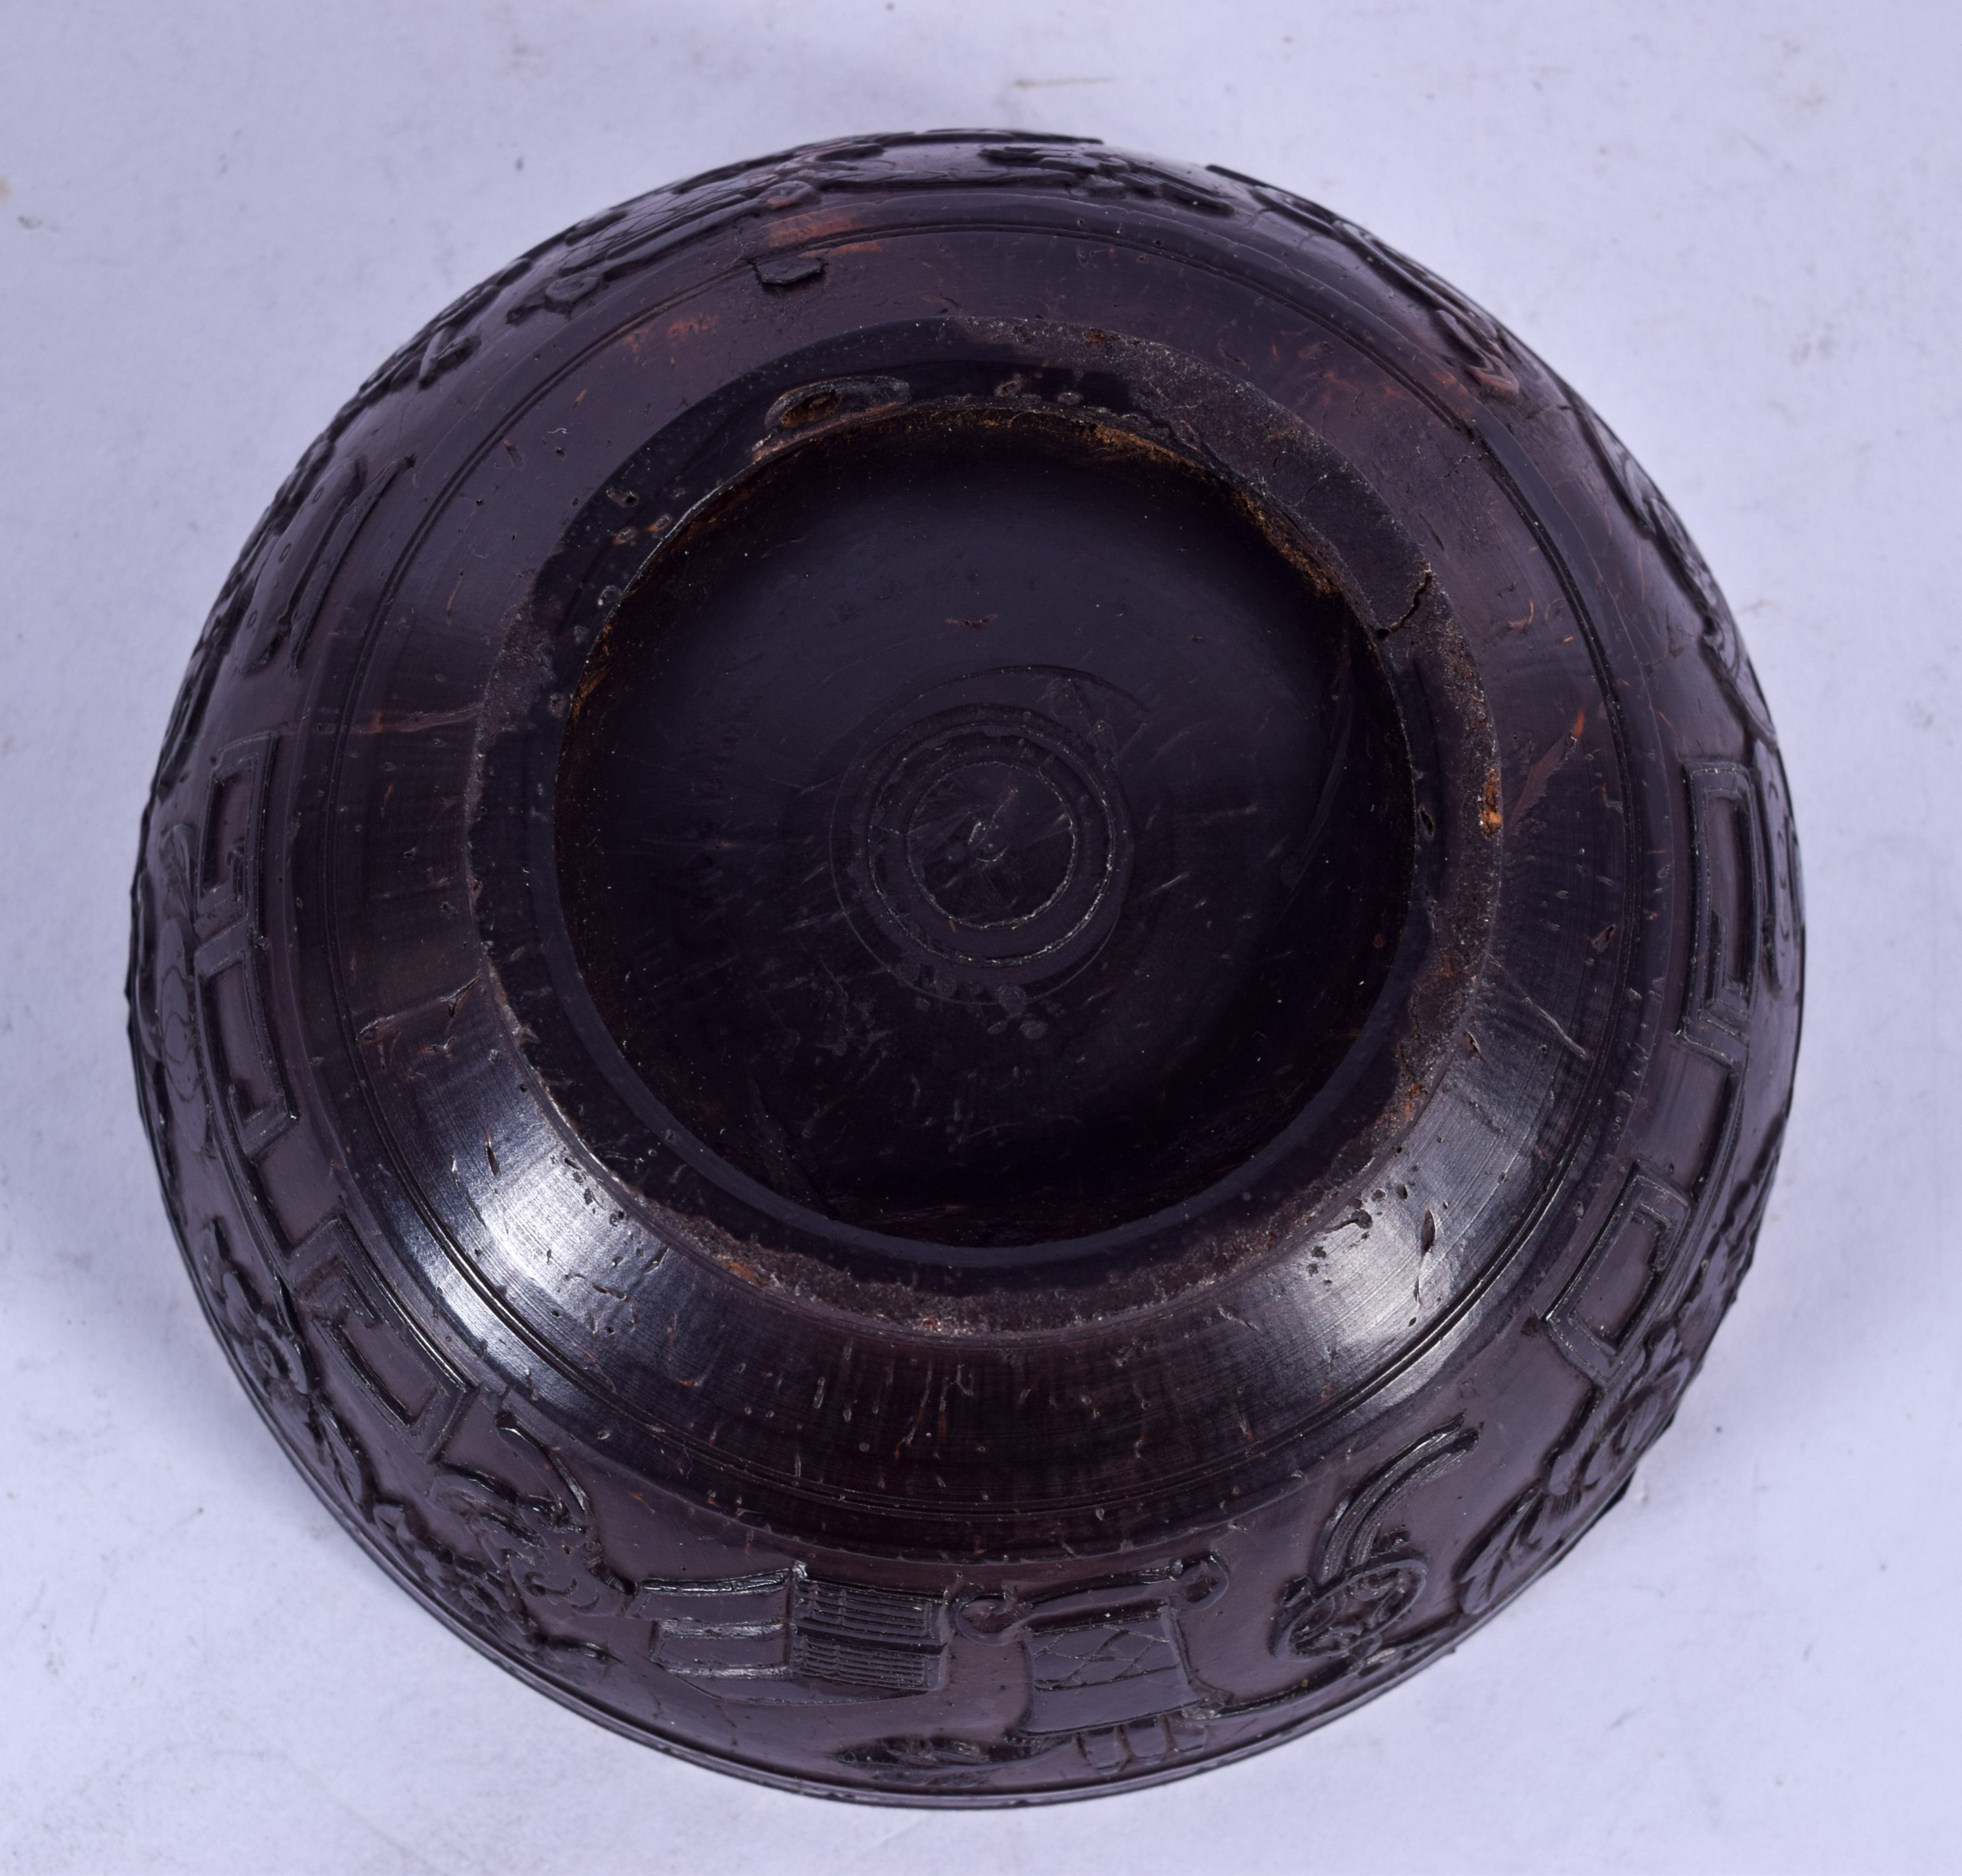 A CHINESE QING DYNASTY COCONUT SHELL BOWL, carved witrh precious objects. 11 cm wide. - Image 3 of 3